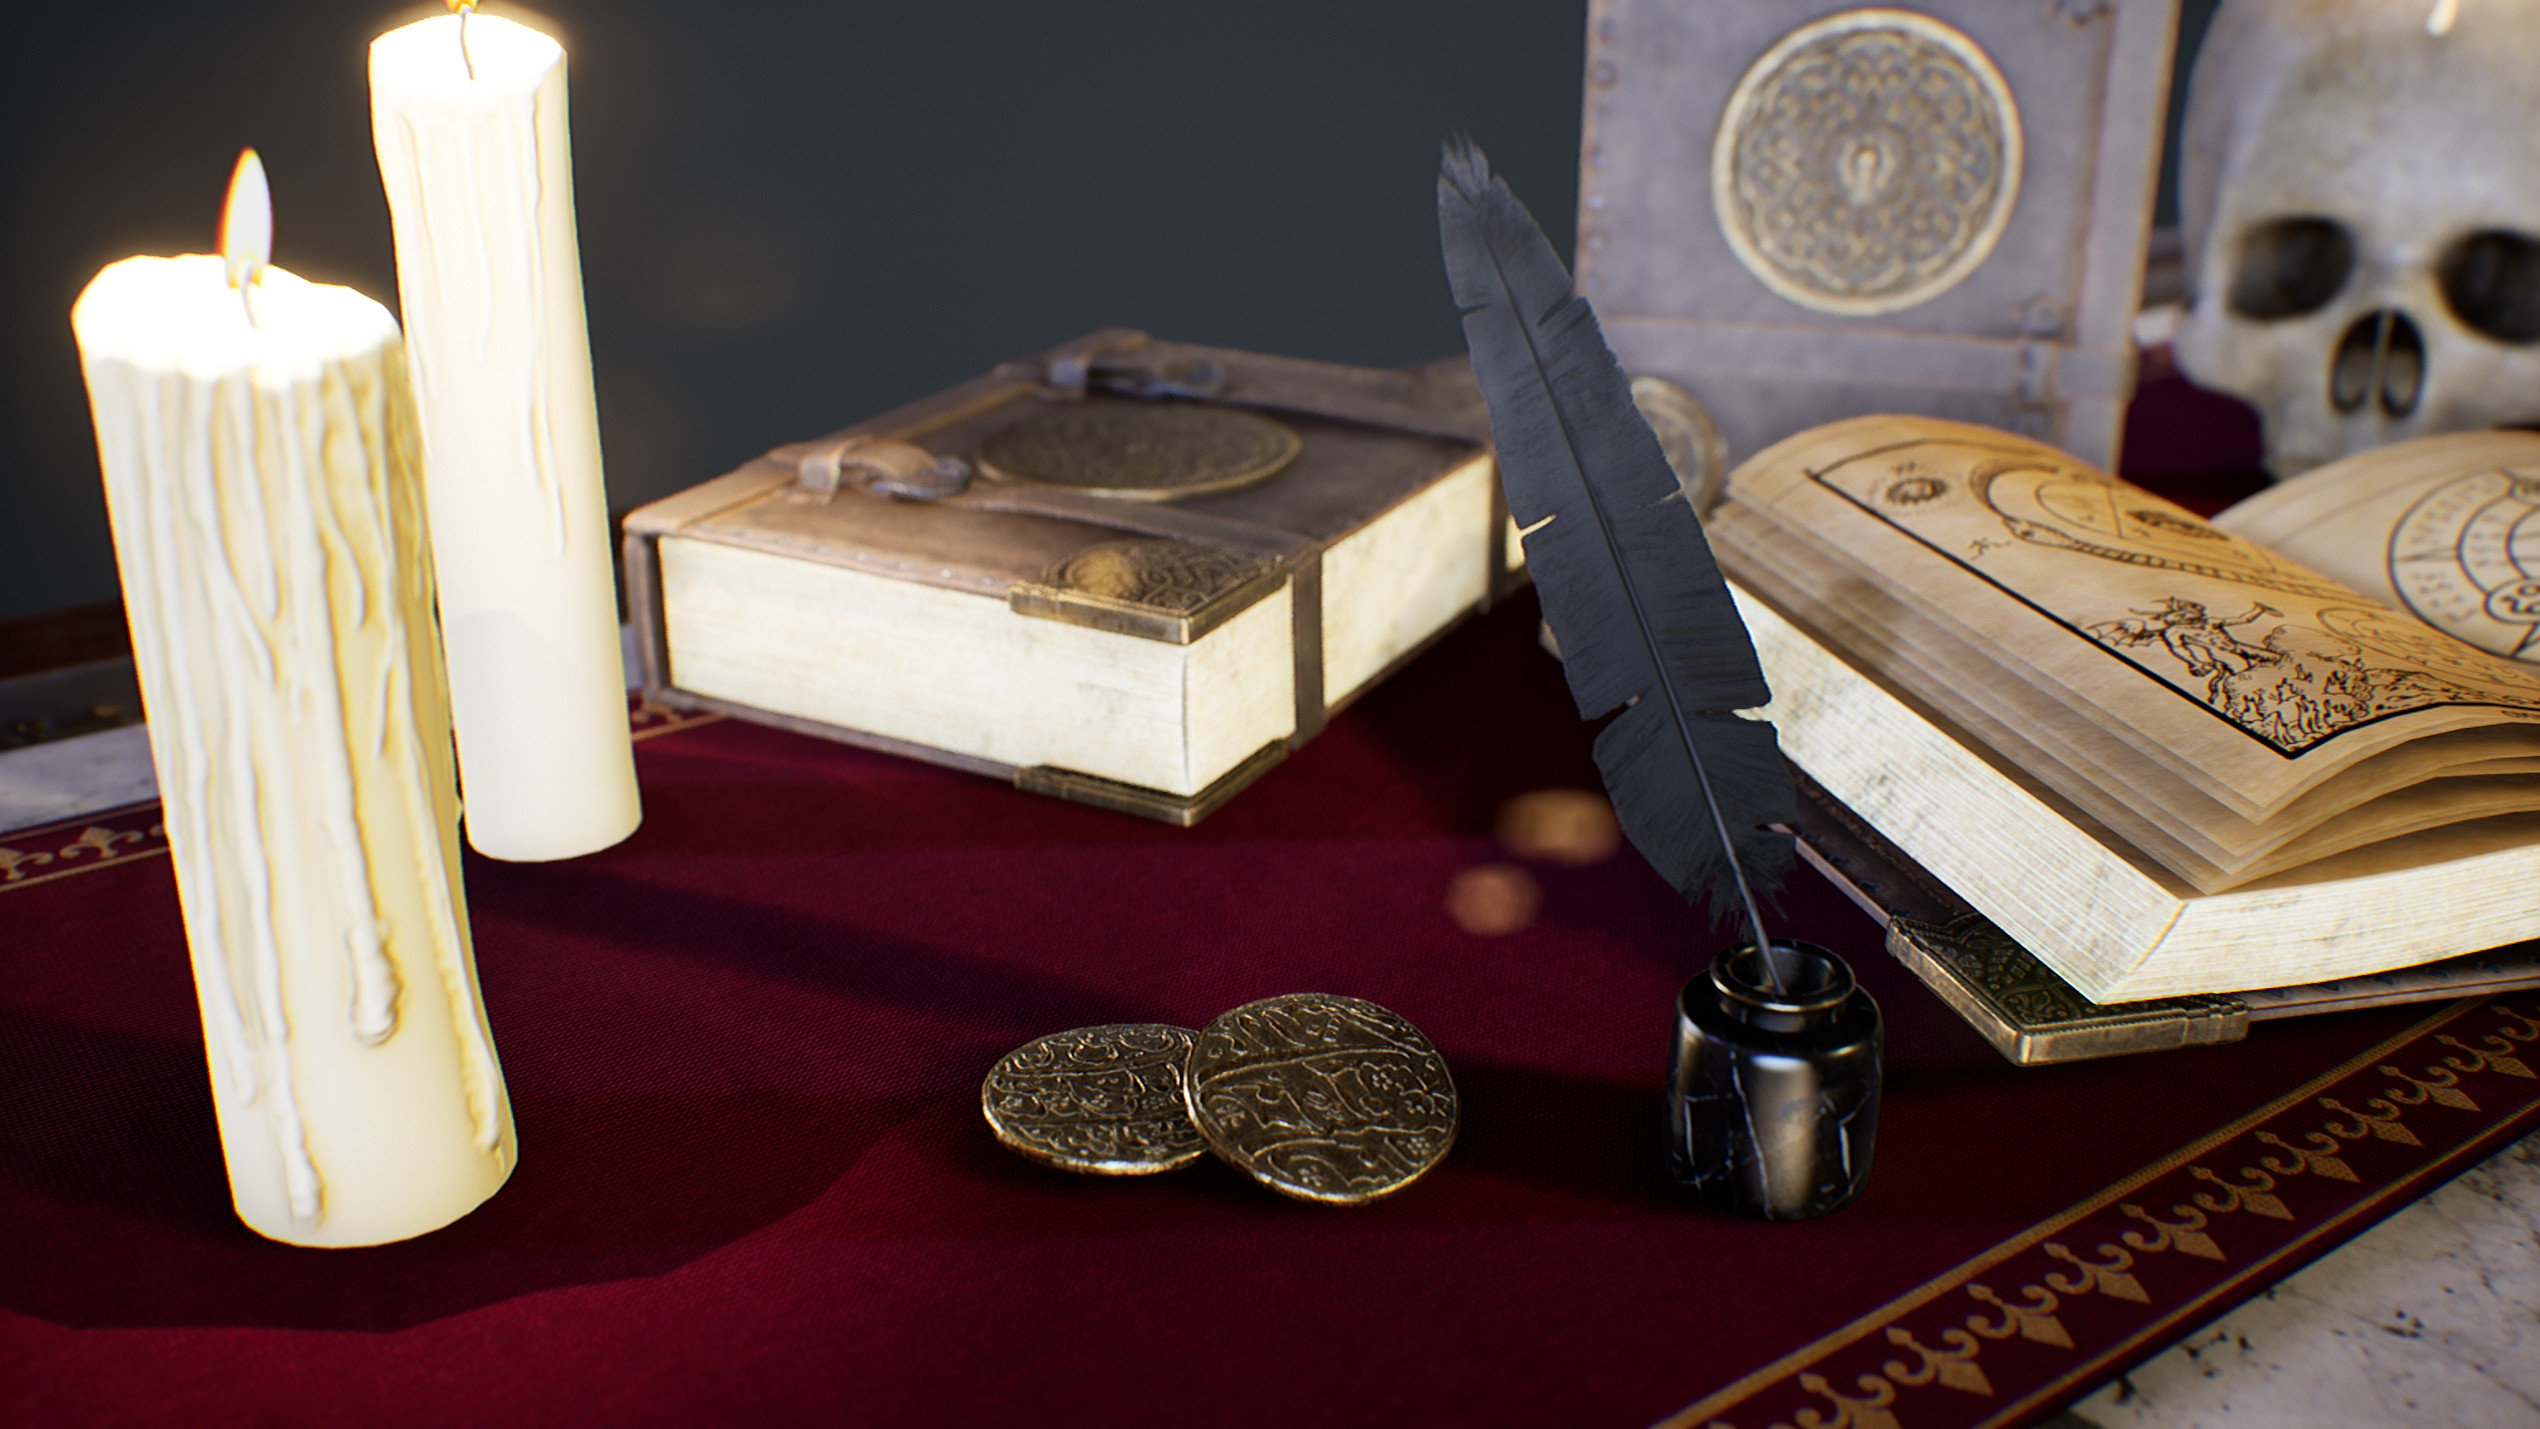 UE4 screenshot close up detailed shot of candles, spell book, coins, feather and ink holder.